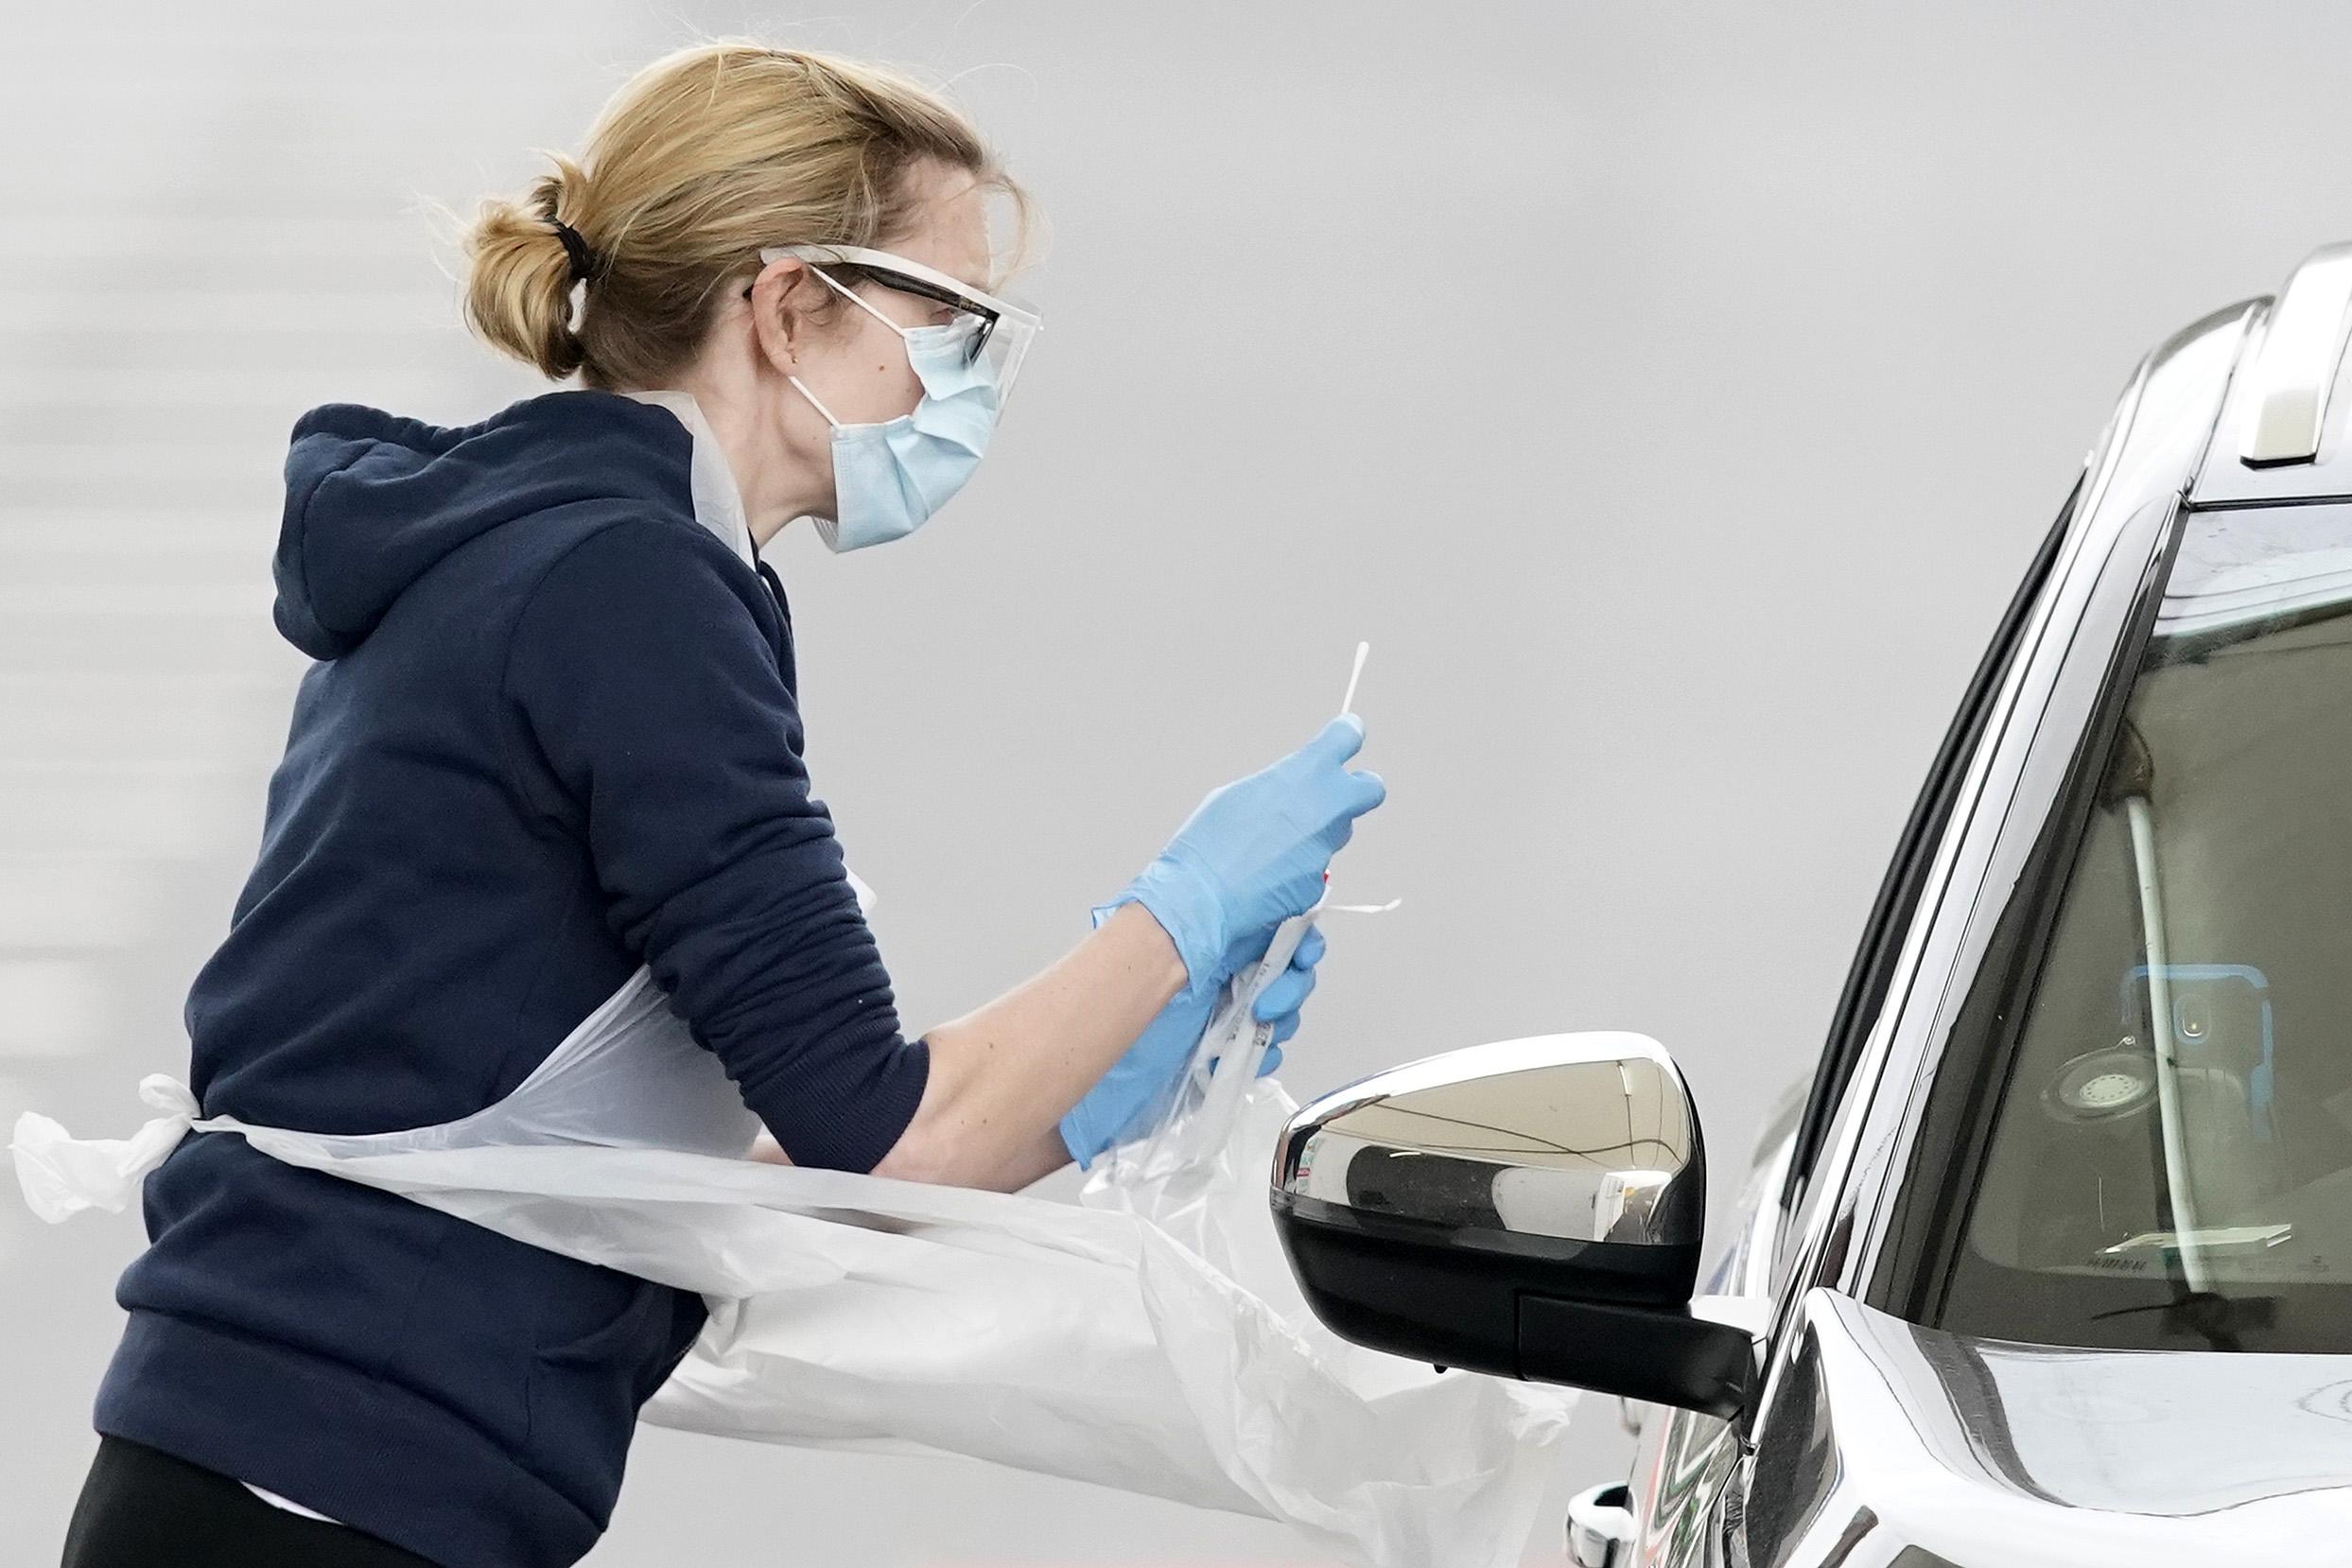 A nurse takes a swab at a Covid-19 drive-through testing station at Manchester airport on 4 April 2020